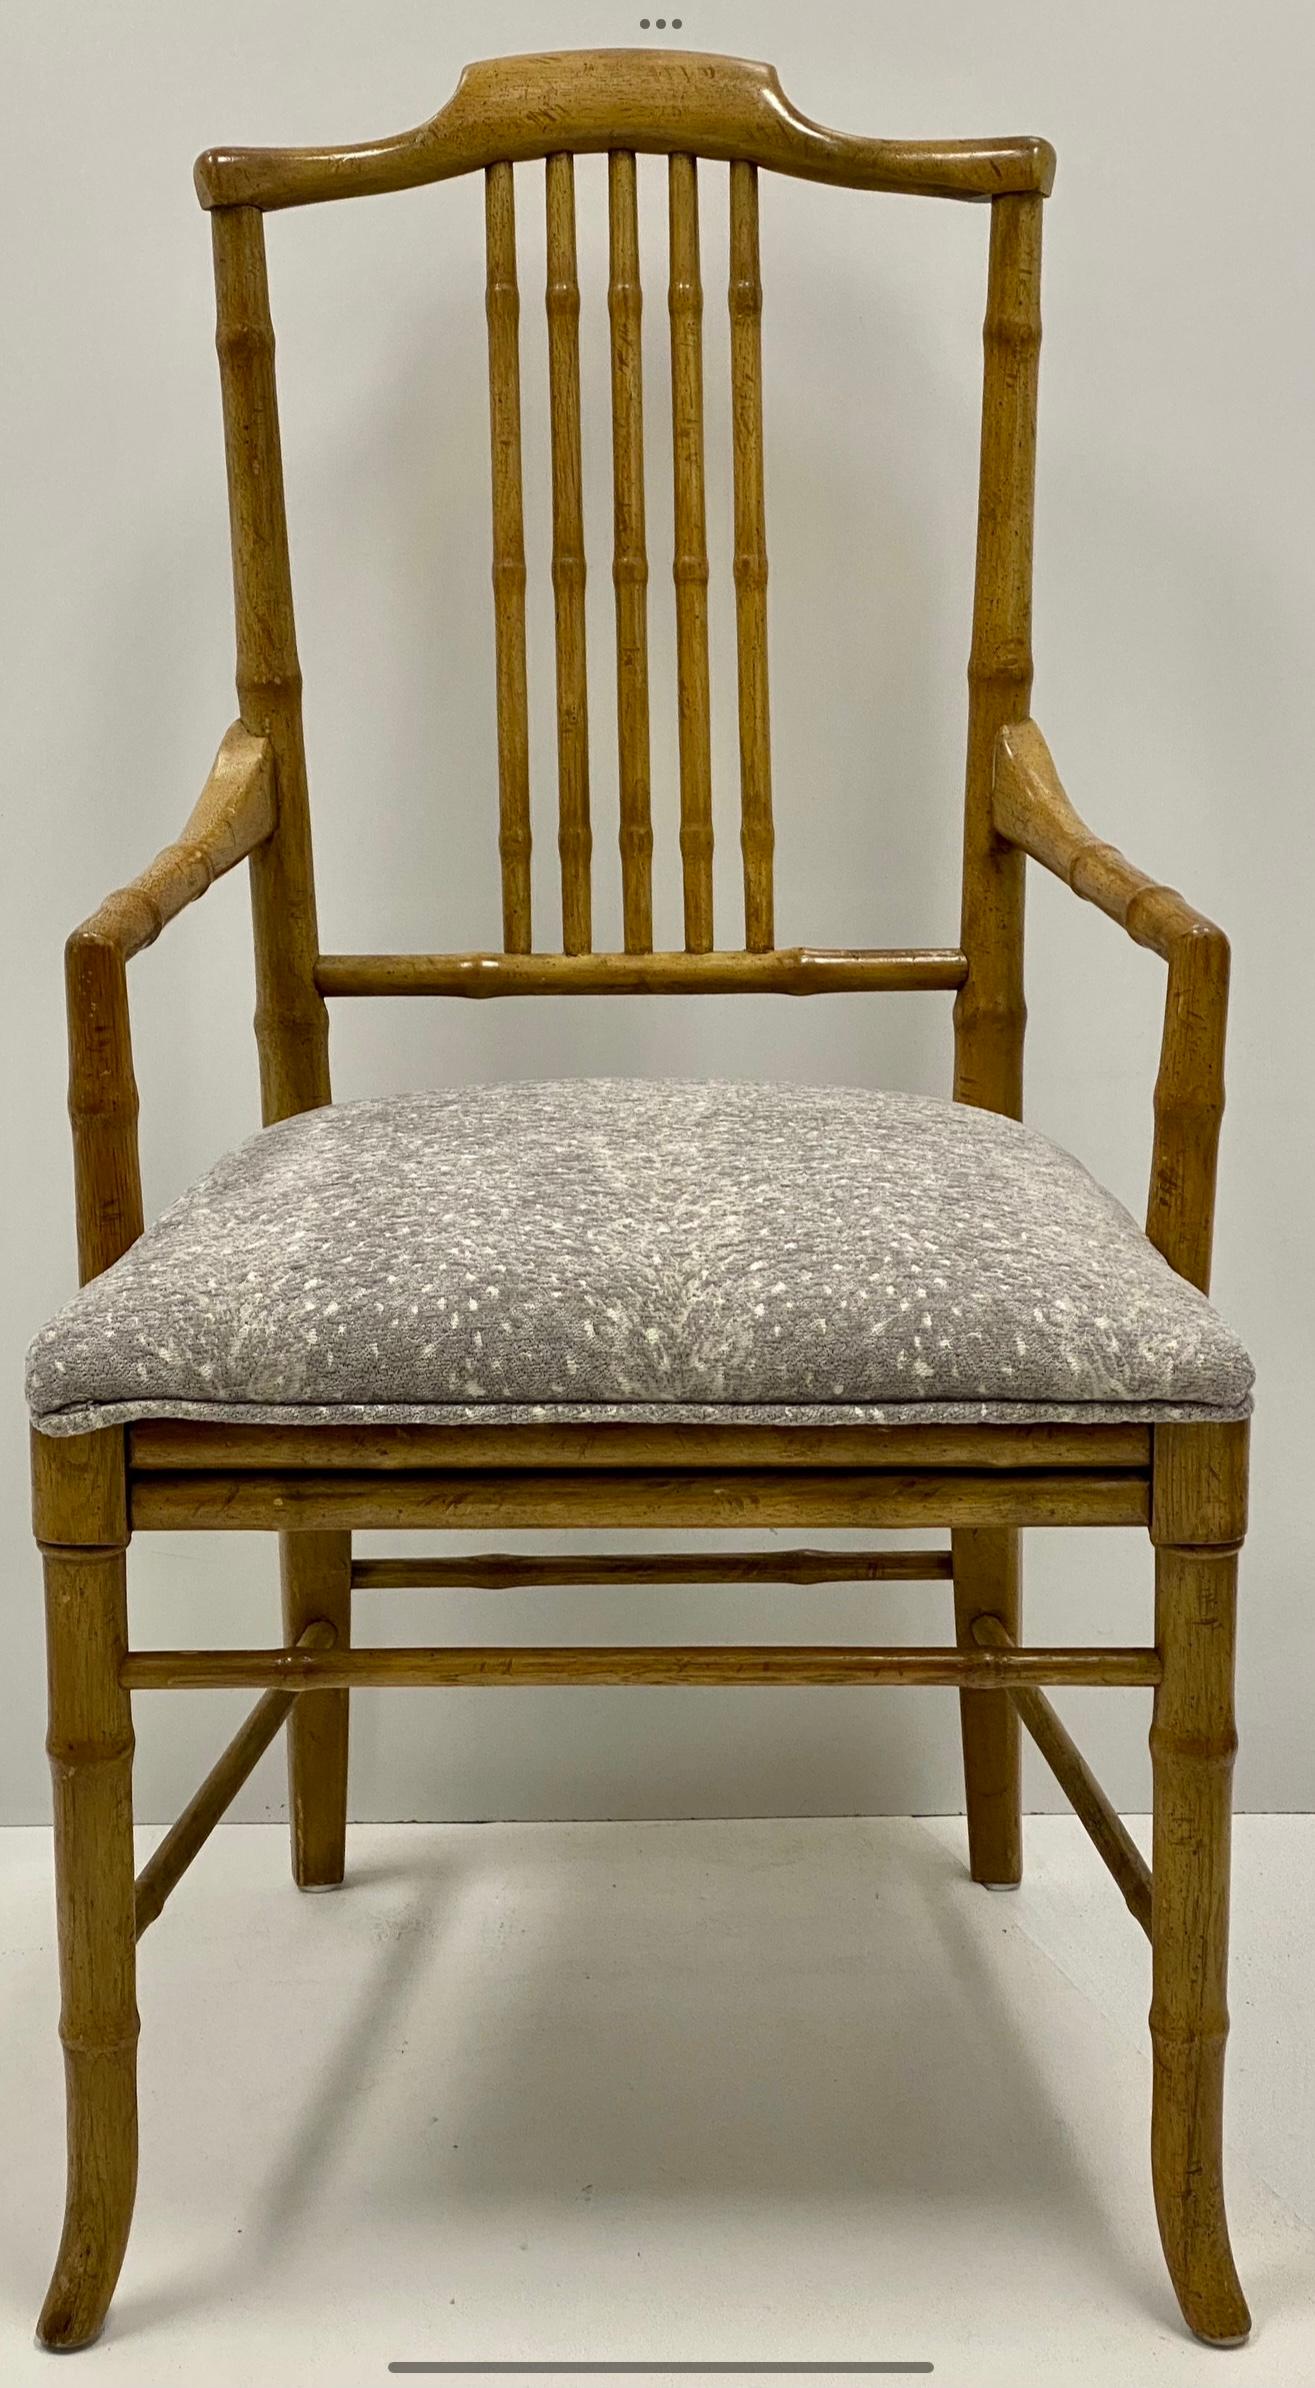 1970s Regency Style Faux Bamboo Bergere Armchairs In Grey Fawn Upholstery -Pair For Sale 4